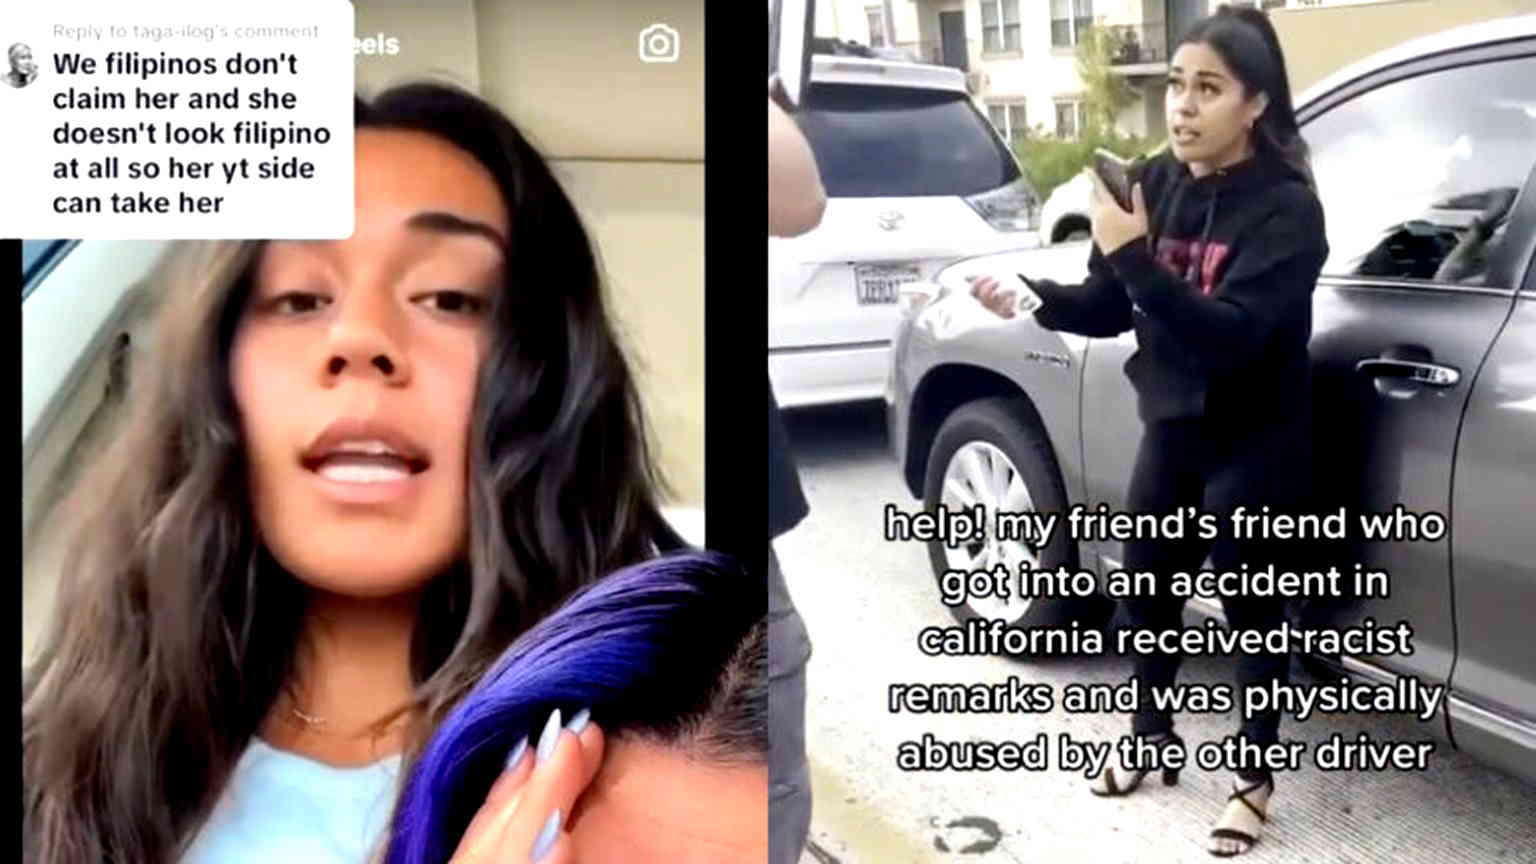 Woman in anti-Asian car incident video claims to be half-Filipino, posts apology